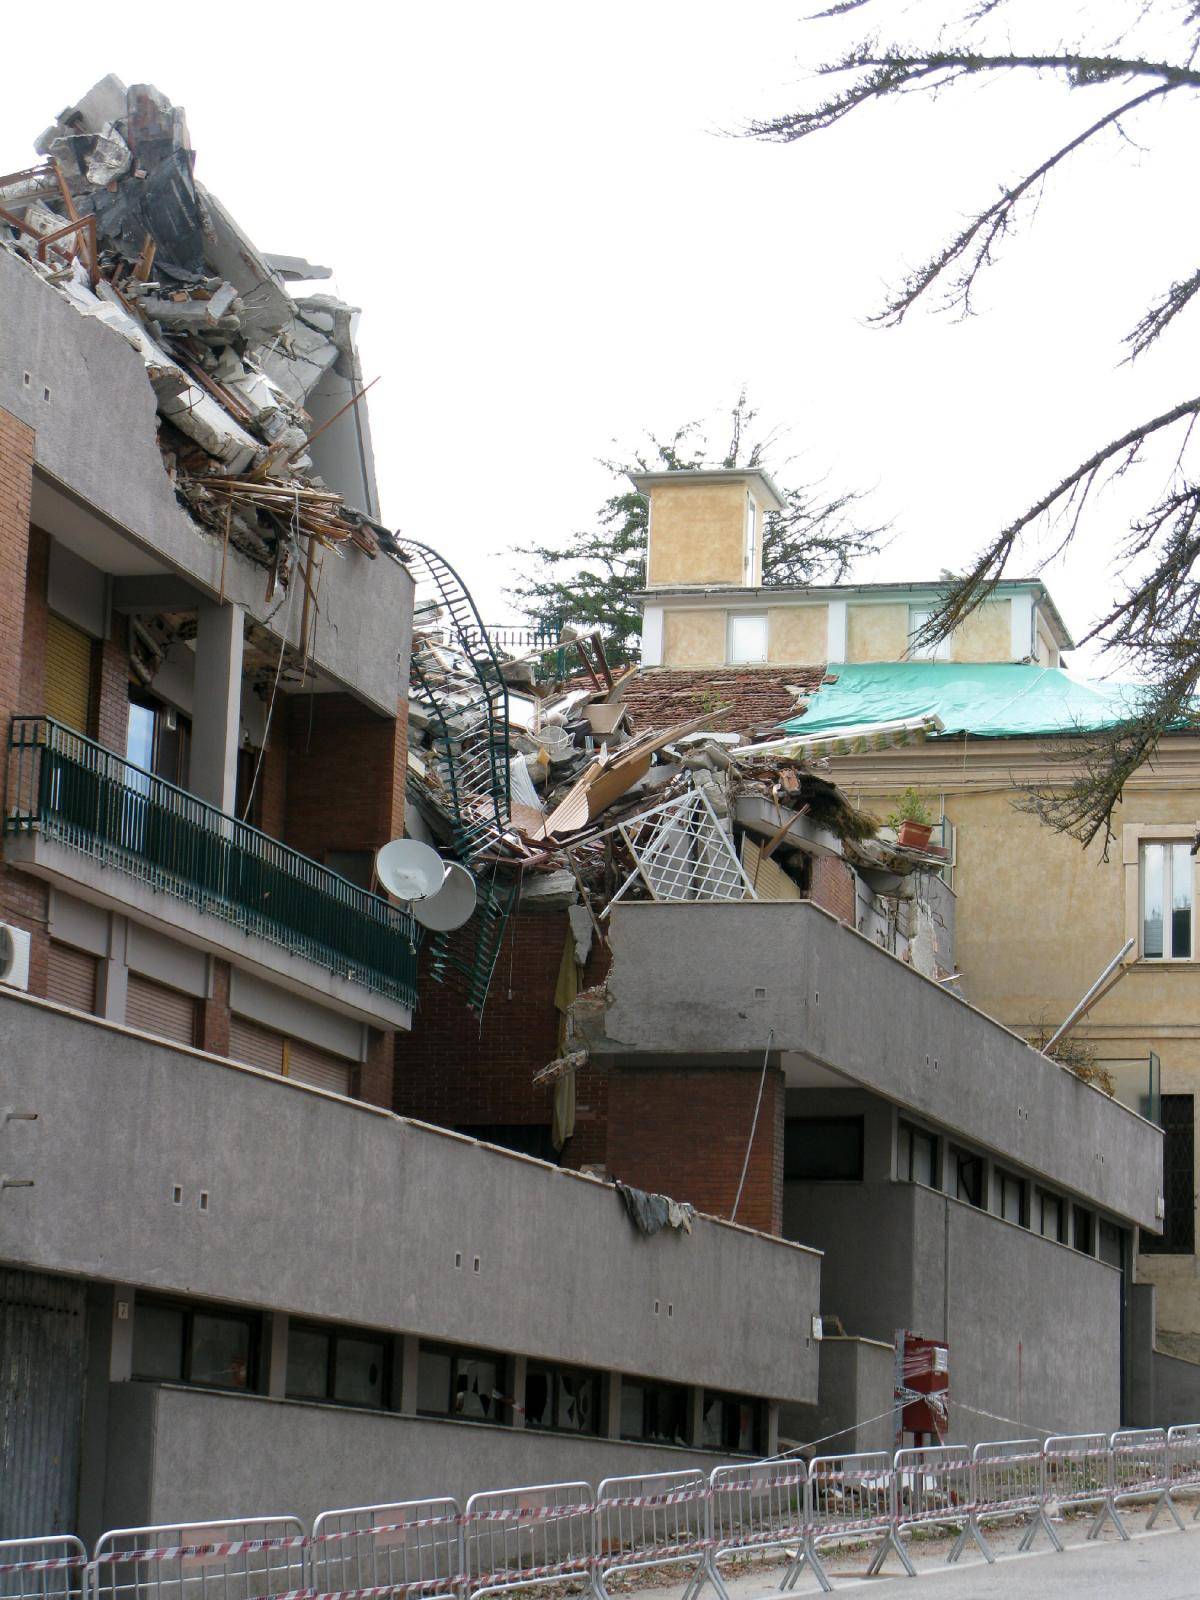 Italy - L'Aquila after the earthquake